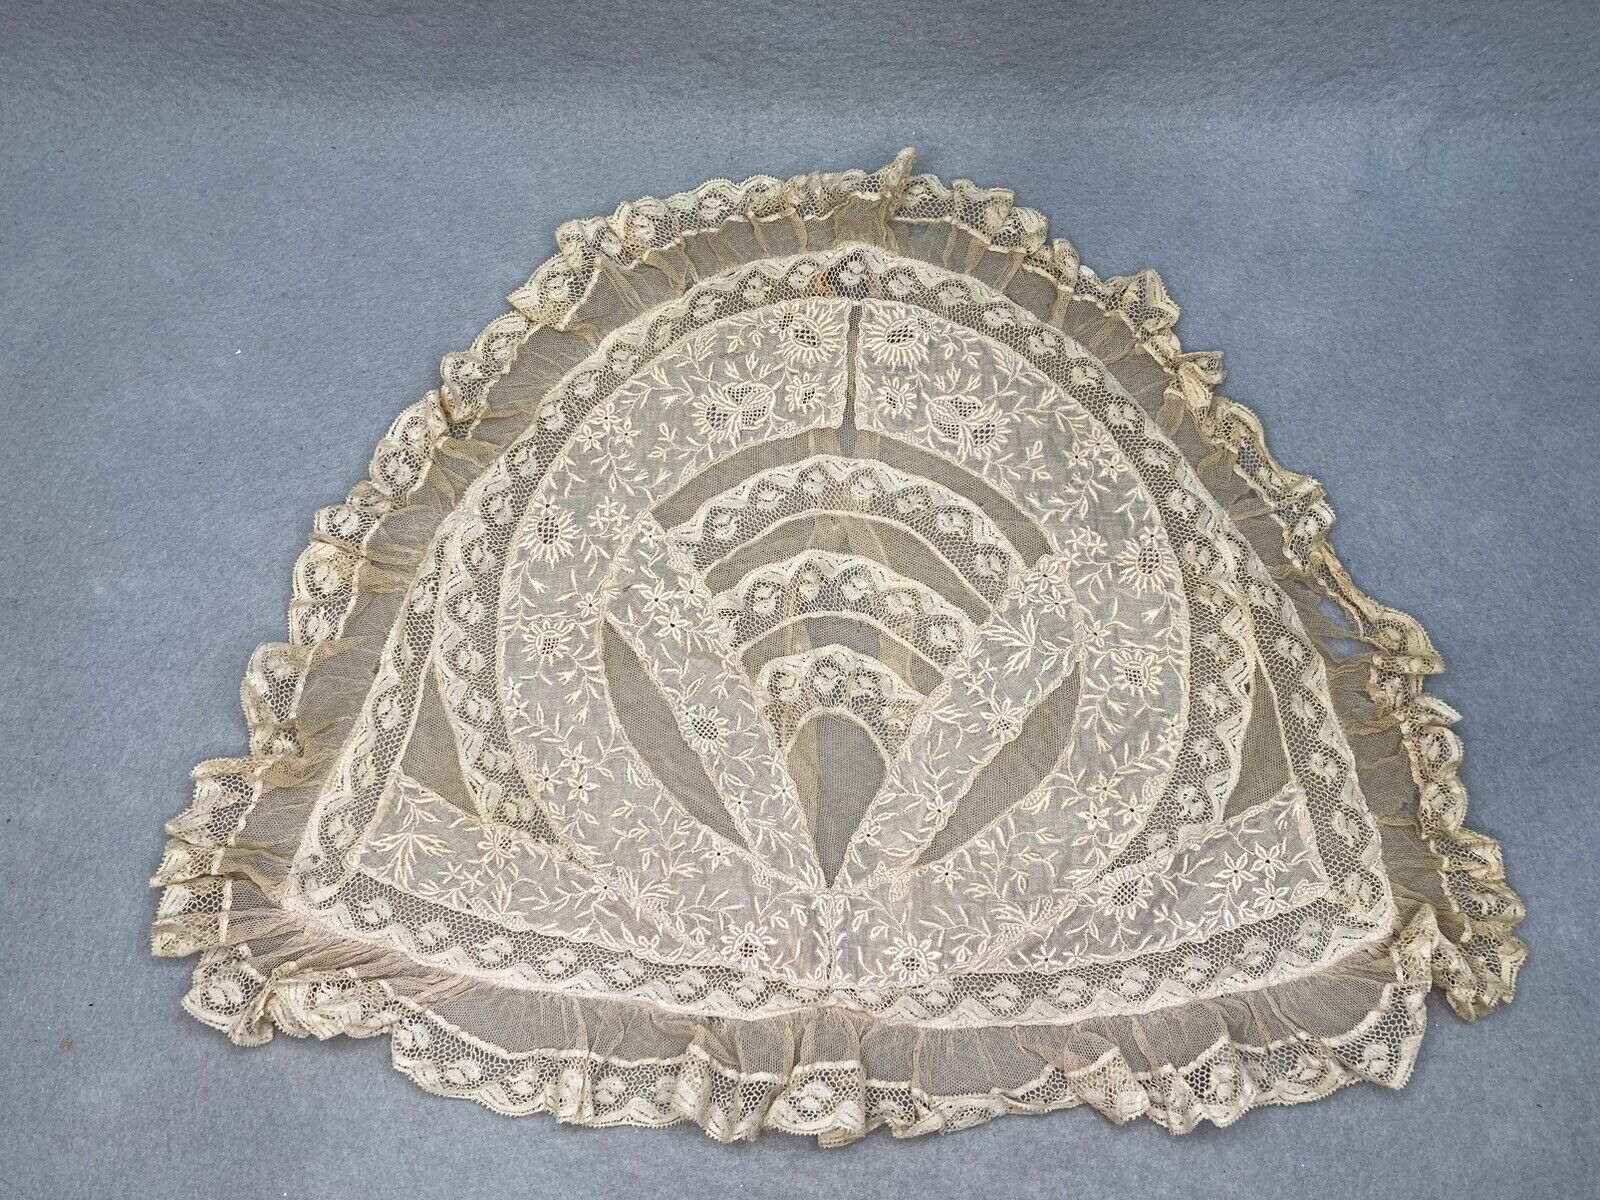 1920s Vintage Saks Fifth Avenue Carlin Comforts Tambour Lace Throw Pillow Sham